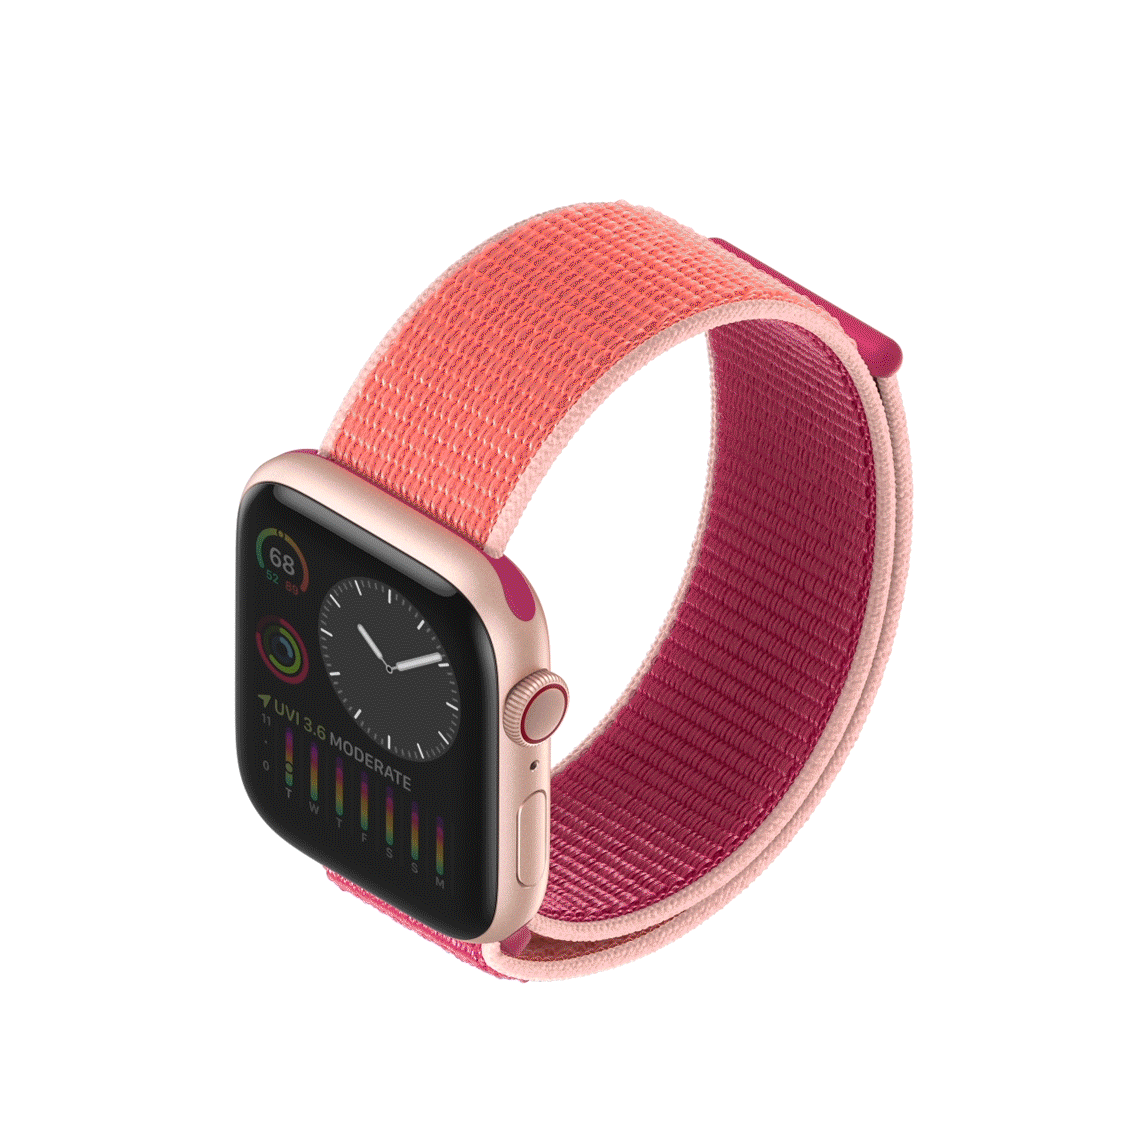 Apple Watch Series 5 comes with Always-On Retina Display, among other things 28